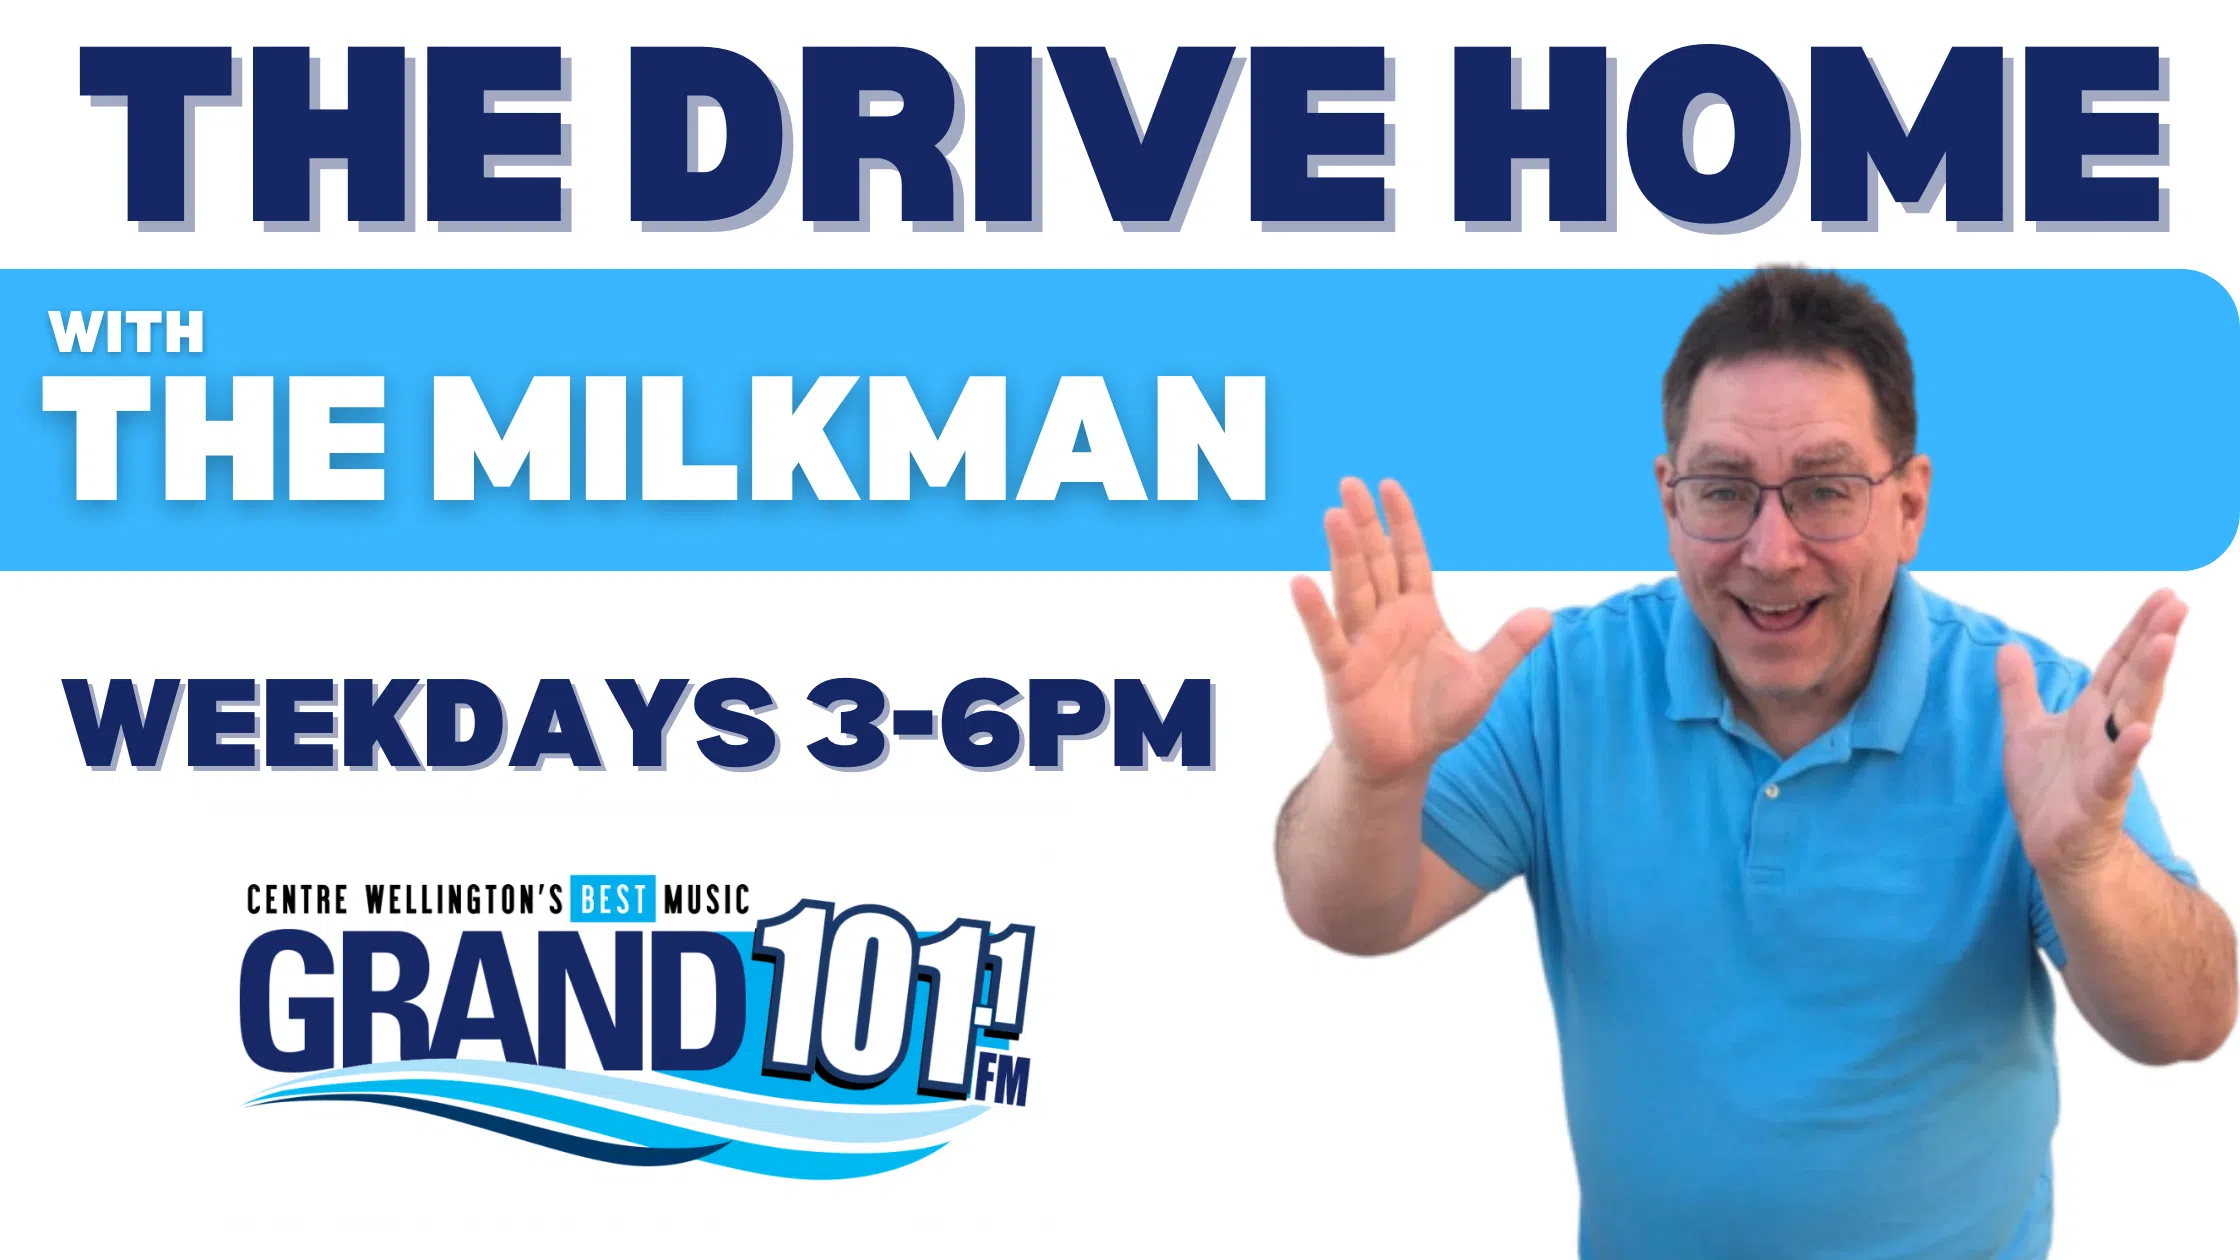 Feature: https://thegrand101.com/the-drive-home-with-the-milkman/